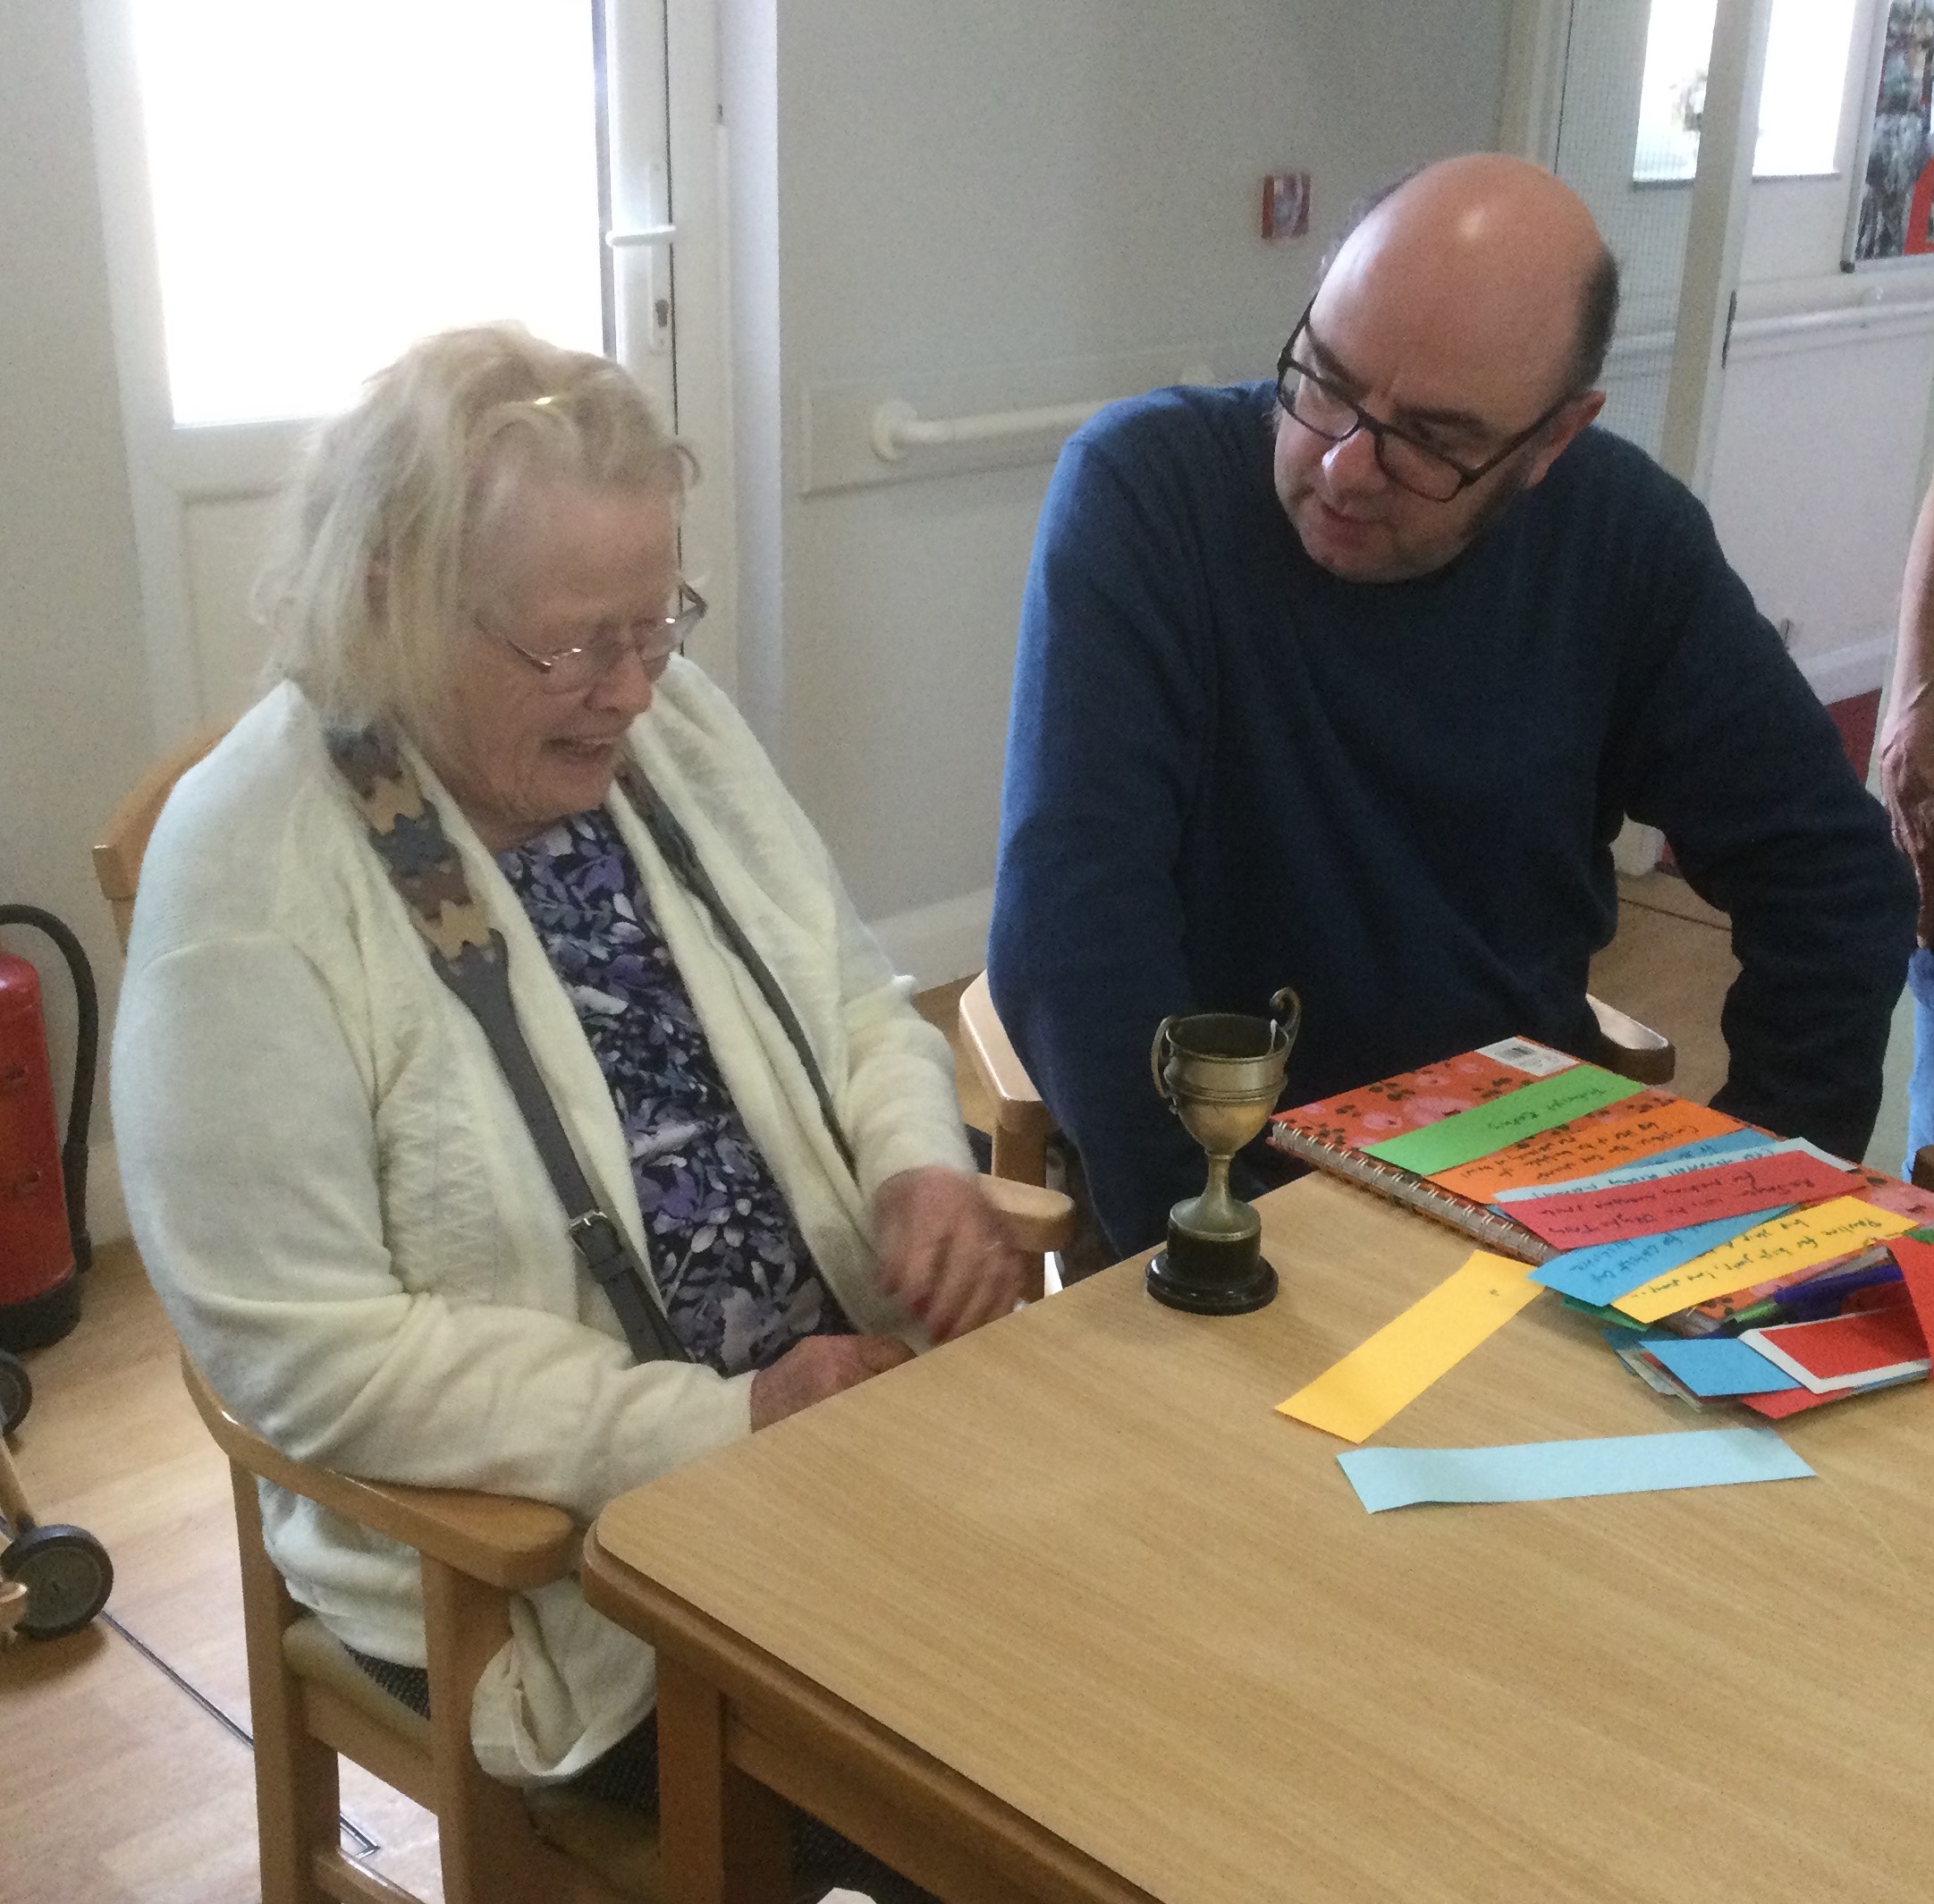 A woman sits looking at a small trophy on the table in front of her whilst a man, with spectacles and dressed in a dark jumper, engages her in conversation. In front of him are numerous strips of different coloured paper